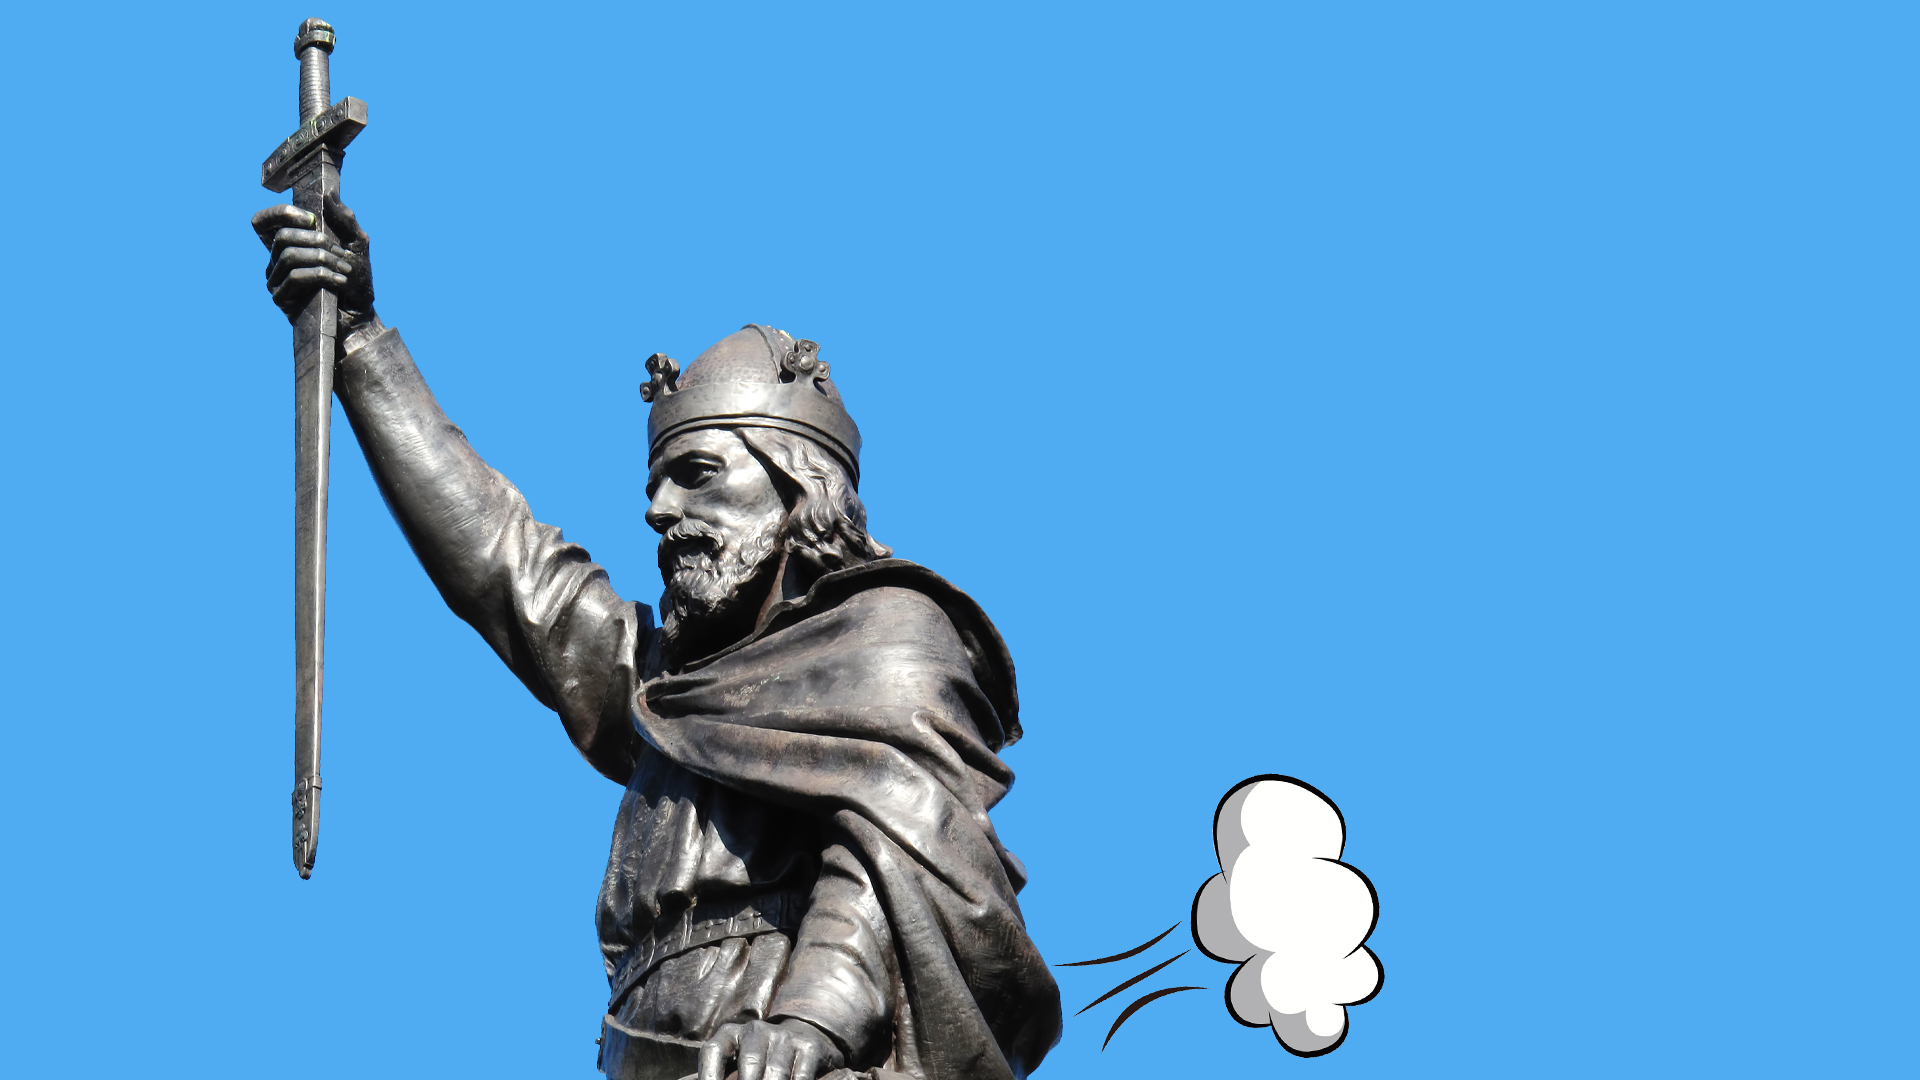 King Alfred farting in the air